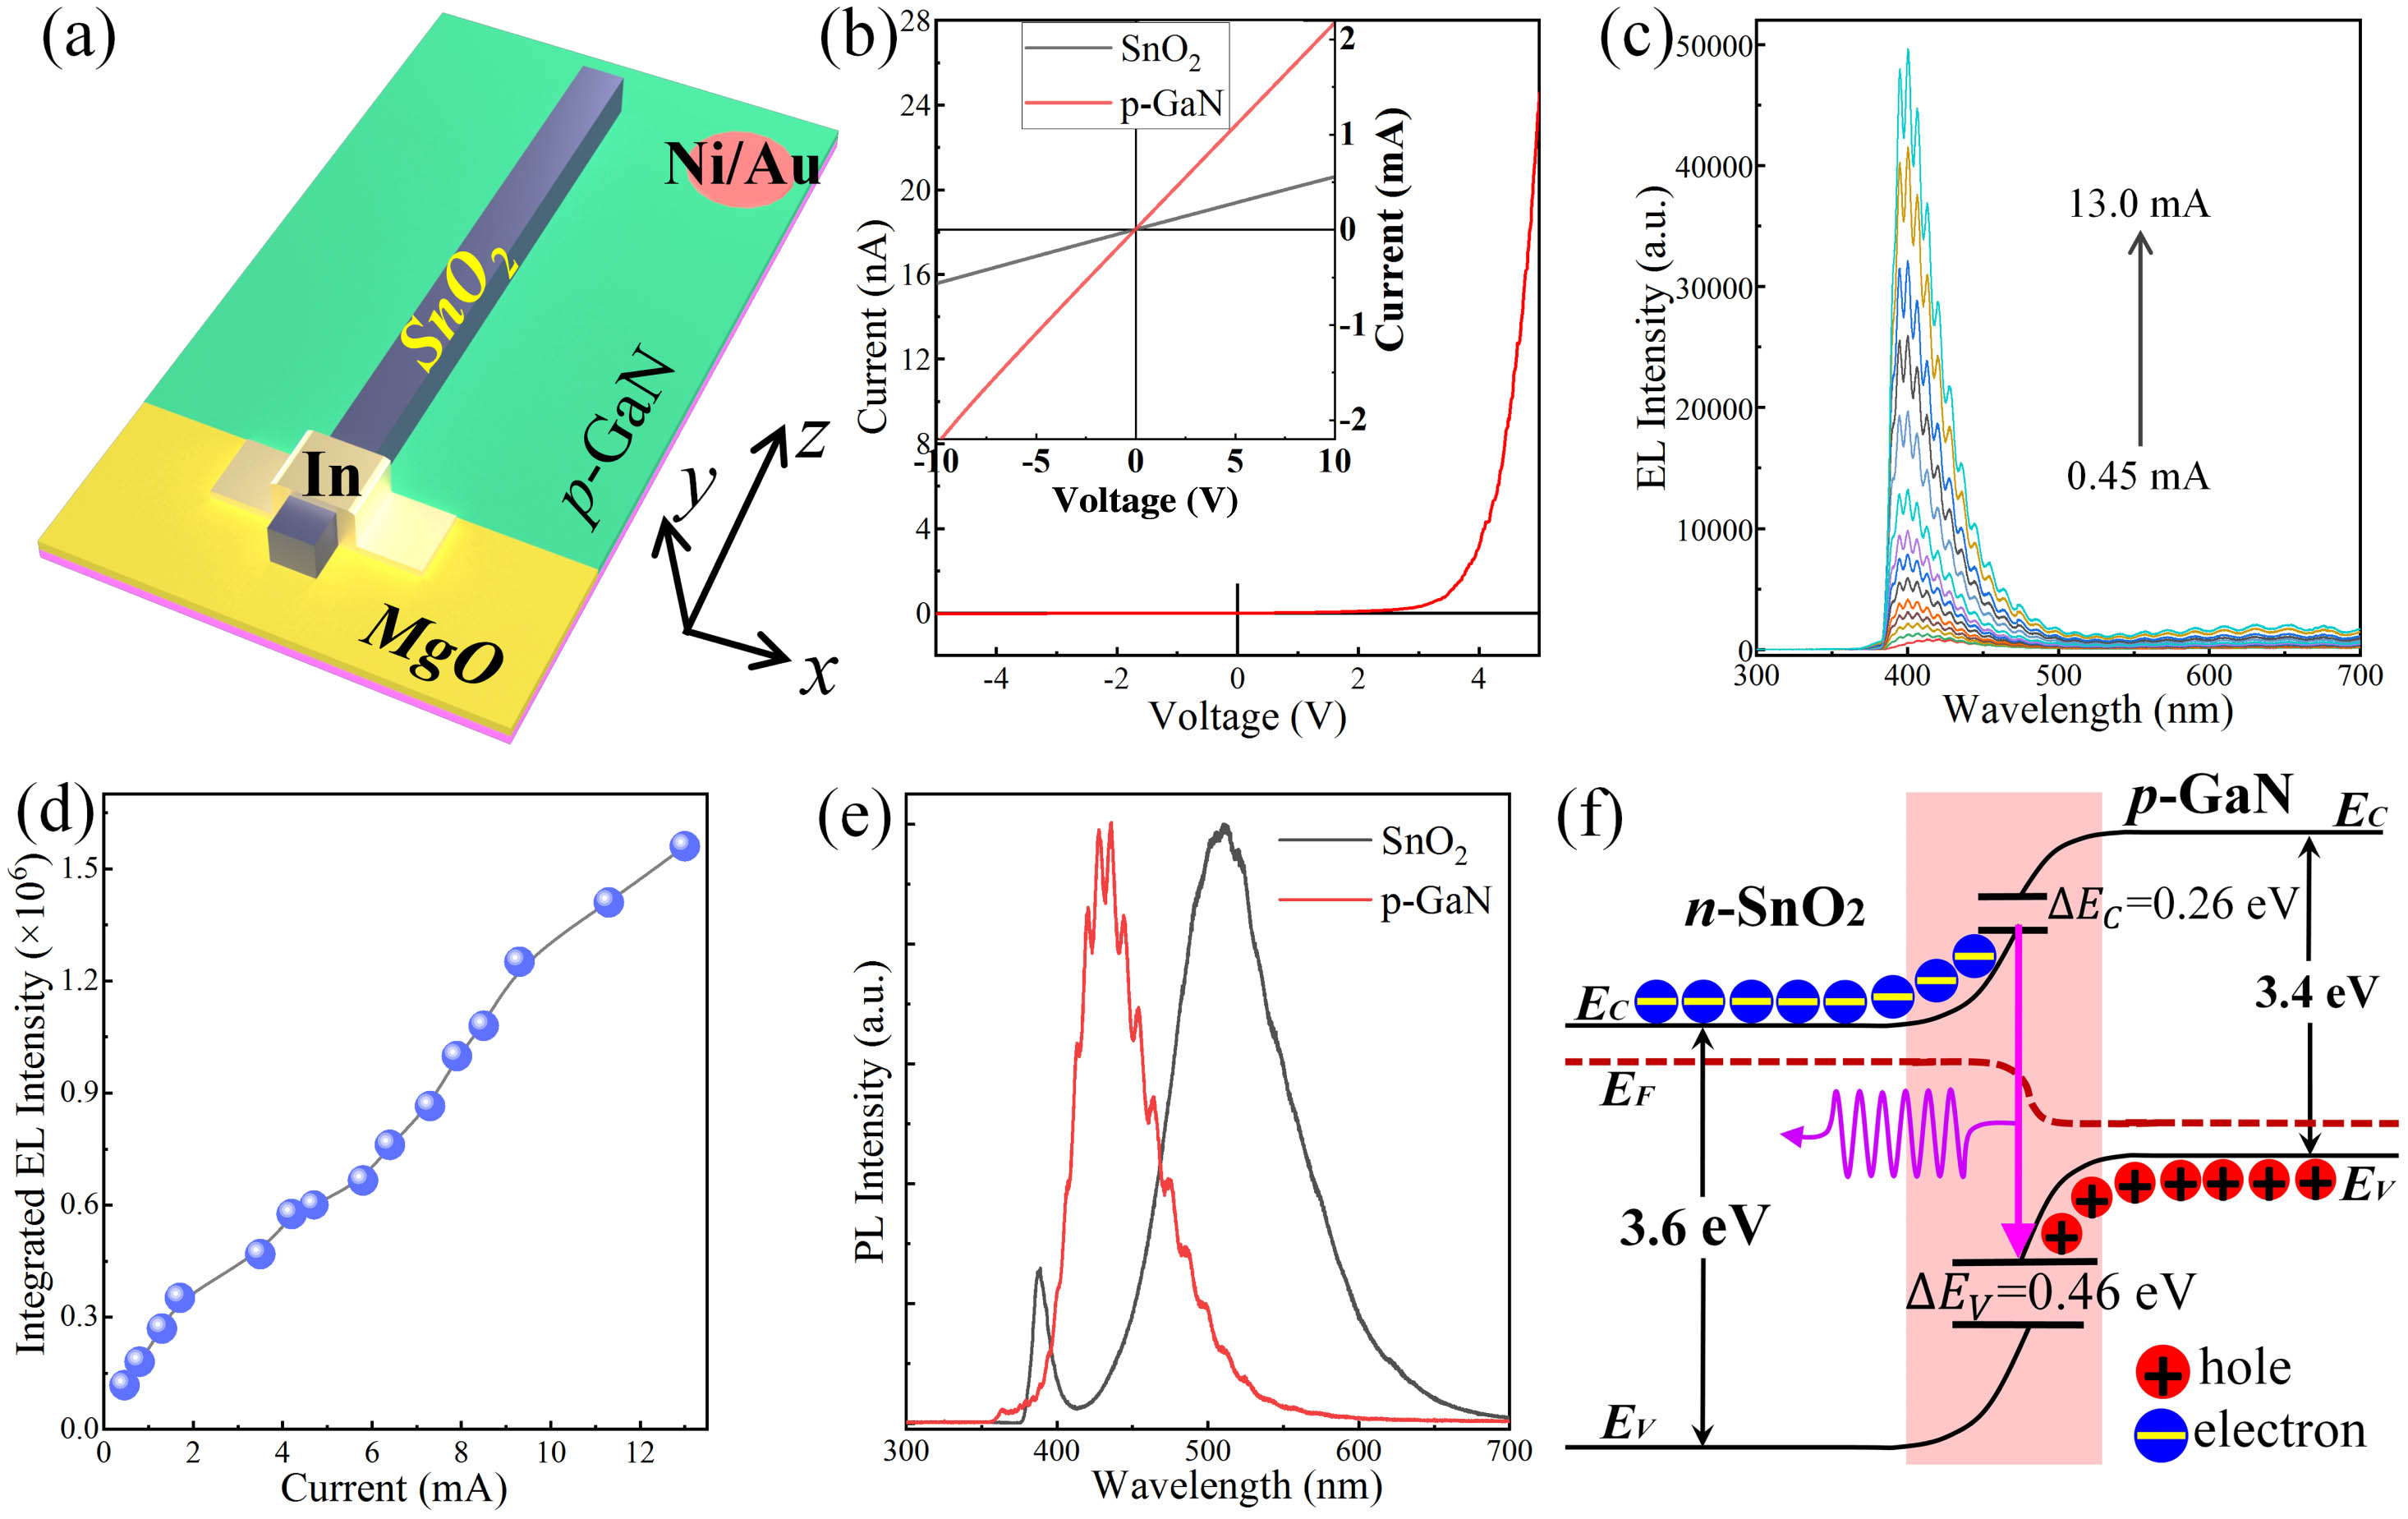 Characterization of the fabricated n-SnO2 MW/p-GaN heterojunction LED. (a) Straightforward illustration of a near-ultraviolet LED structure, which is made of an individual SnO2 MW and p-GaN substrate. In the device architecture, In and Ni/Au are employed as electrodes for the current injection. (b) I-V curve of the fabricated SnO2 MW/p-GaN heterostructure, suggesting diode-like rectifying characteristic. Inset: I-V curves of an individual SnO2 MW and p-type GaN template, yielding ohmic contact behaviors. (c) The EL spectra as a function of the input current varied from 0.45 to 13.0 mA. (d) Variation of integrated EL intensity versus injection current. (e) Normalized PL spectra of a SnO2 MW and p-type GaN substrate, respectively. (f) Schematic of the energy band diagram of n-SnO2 MW/p-GaN heterojunction.